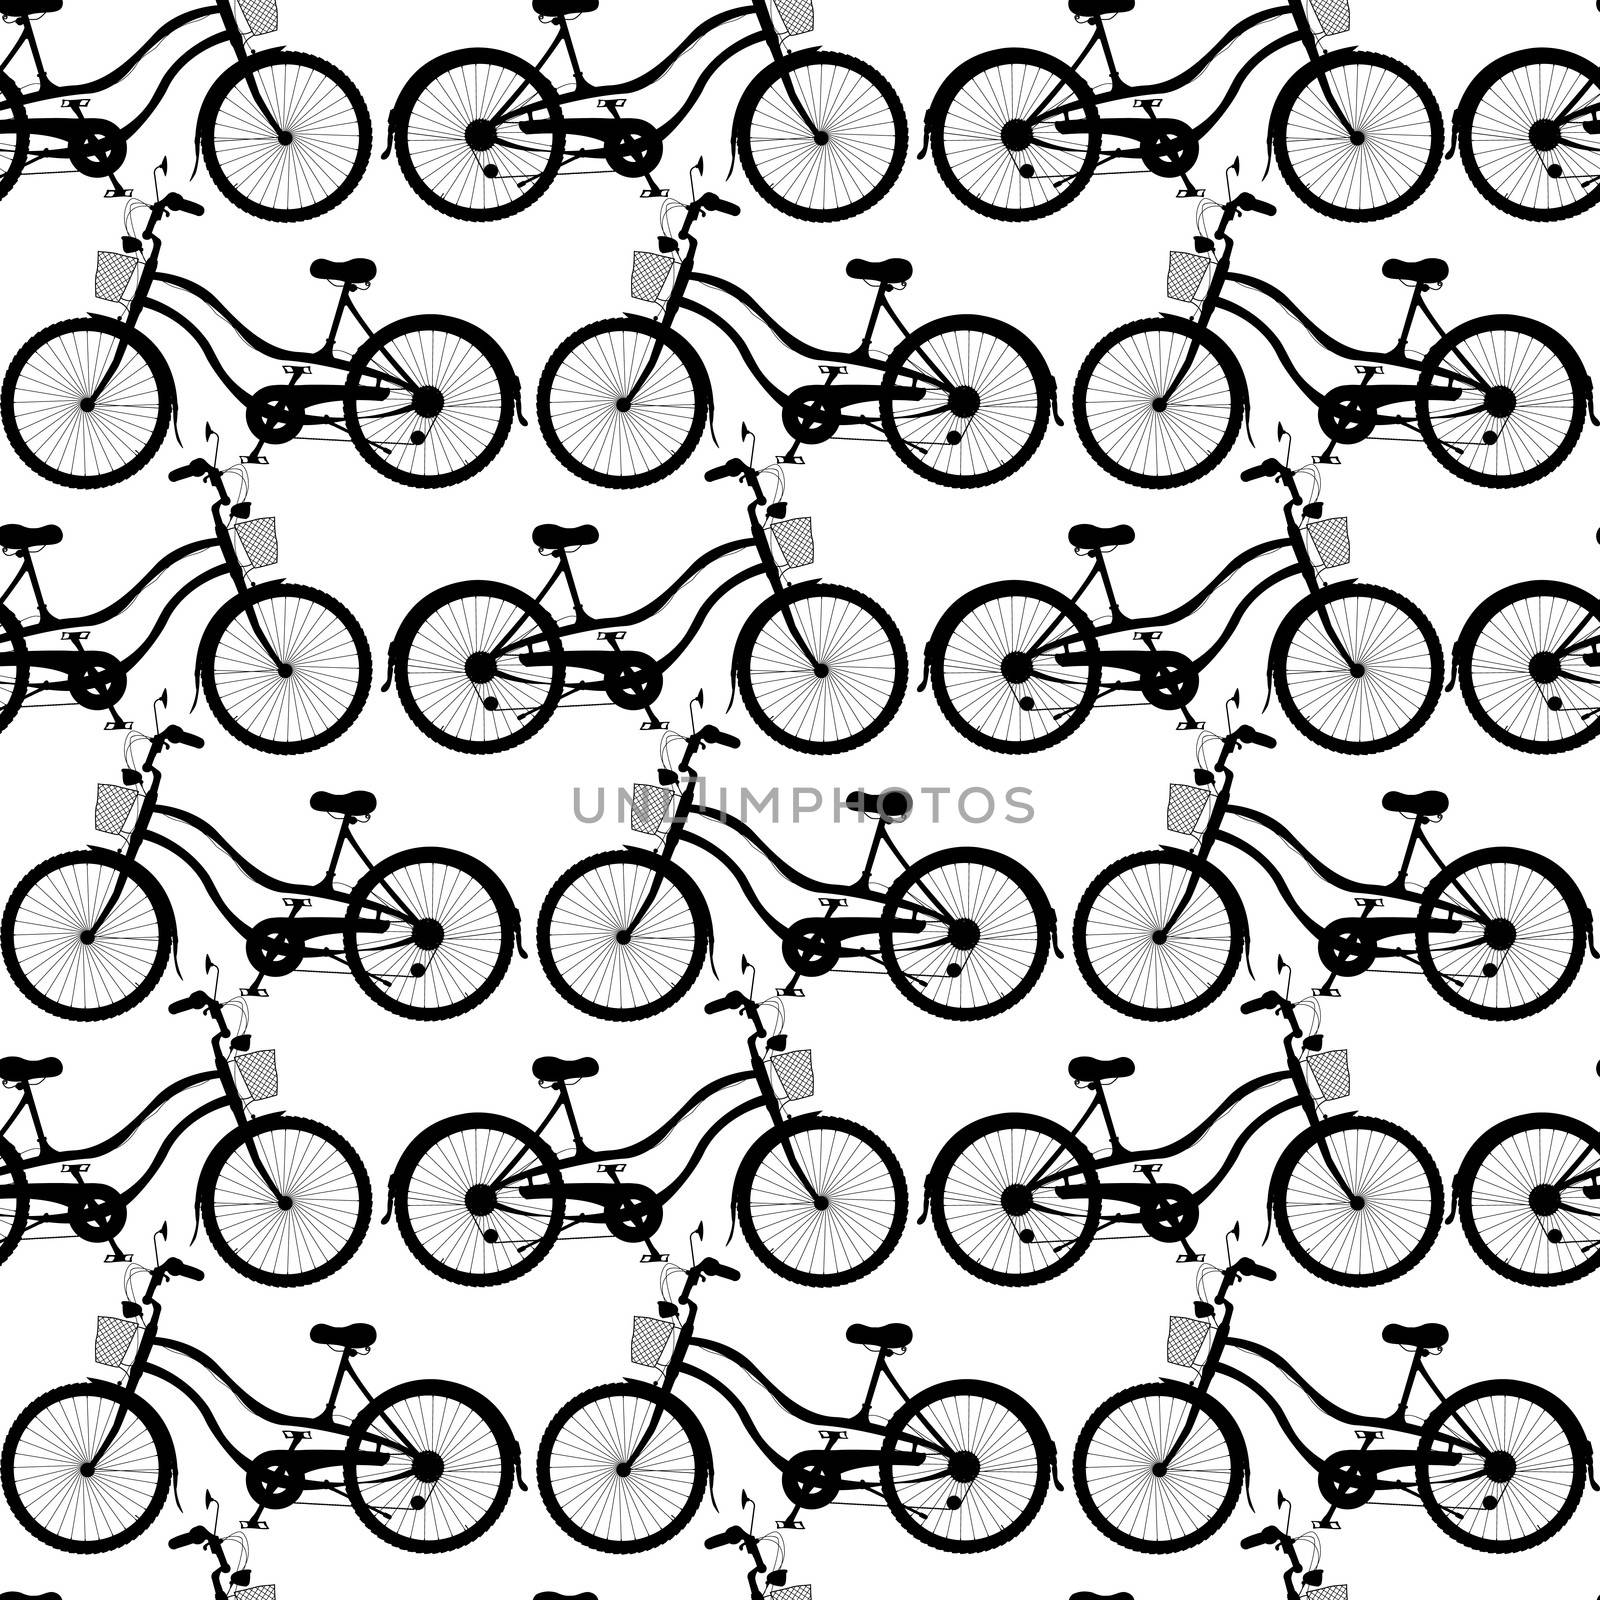 Bicycle pattern design by Lirch